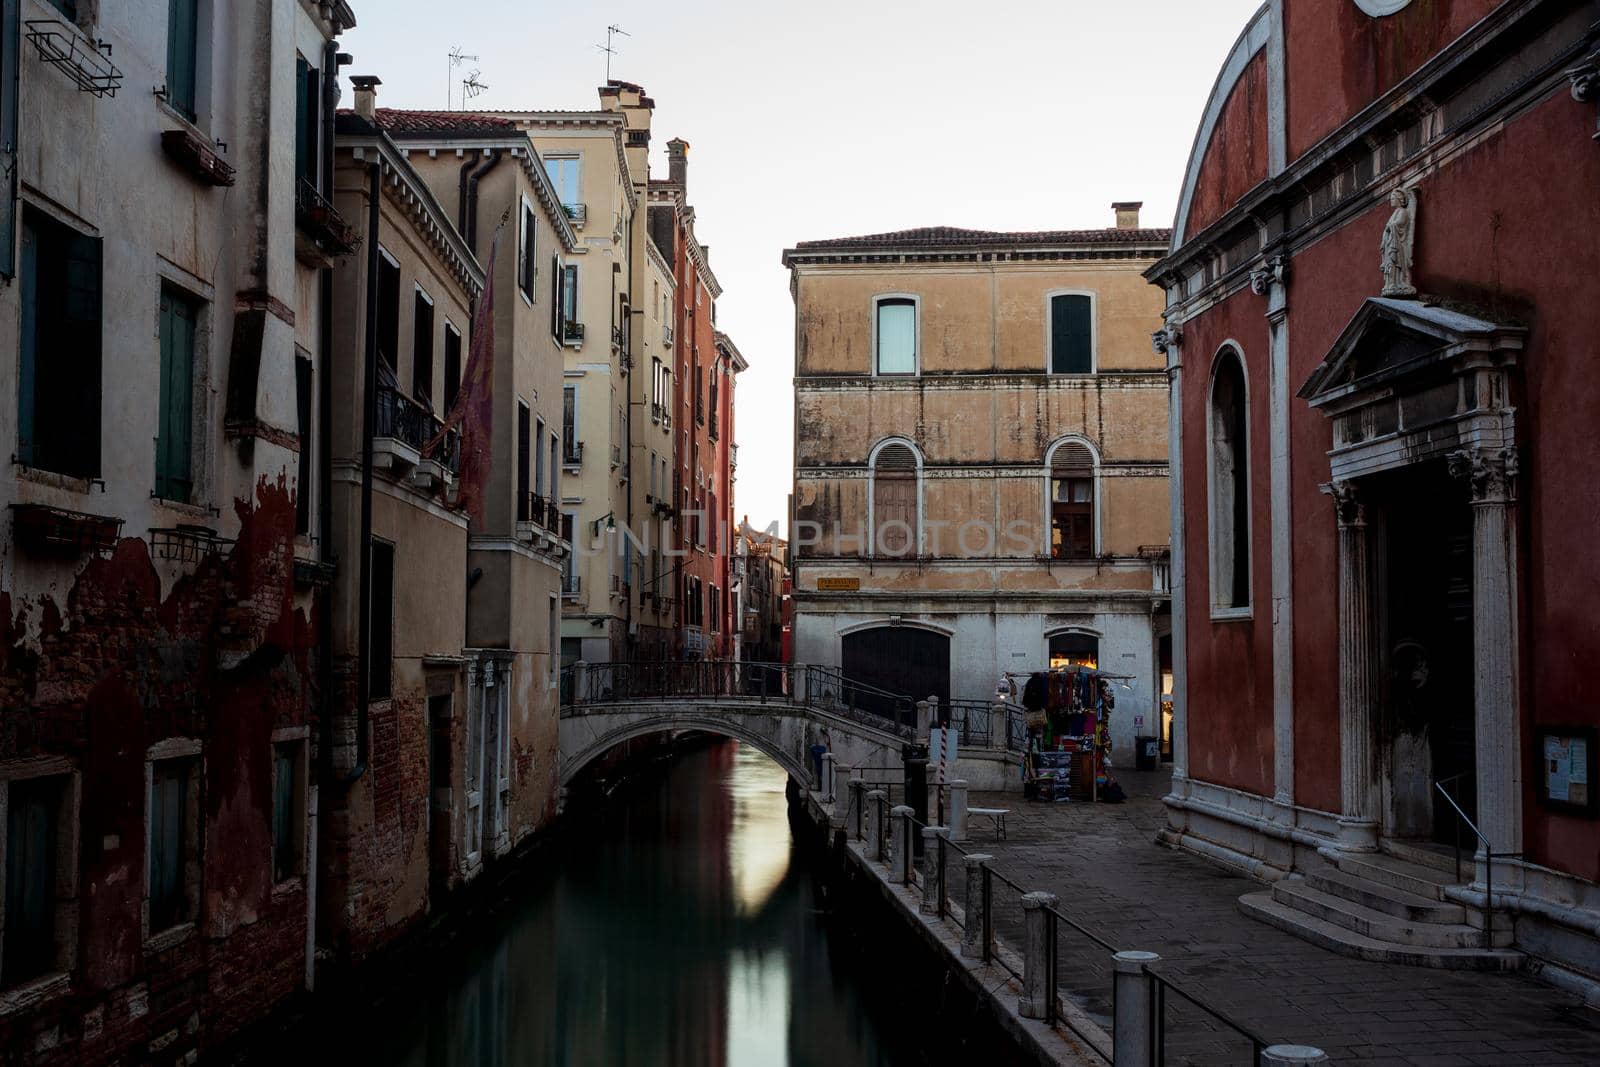 The old bridge made with marble on the typical canal in Venice by bepsimage